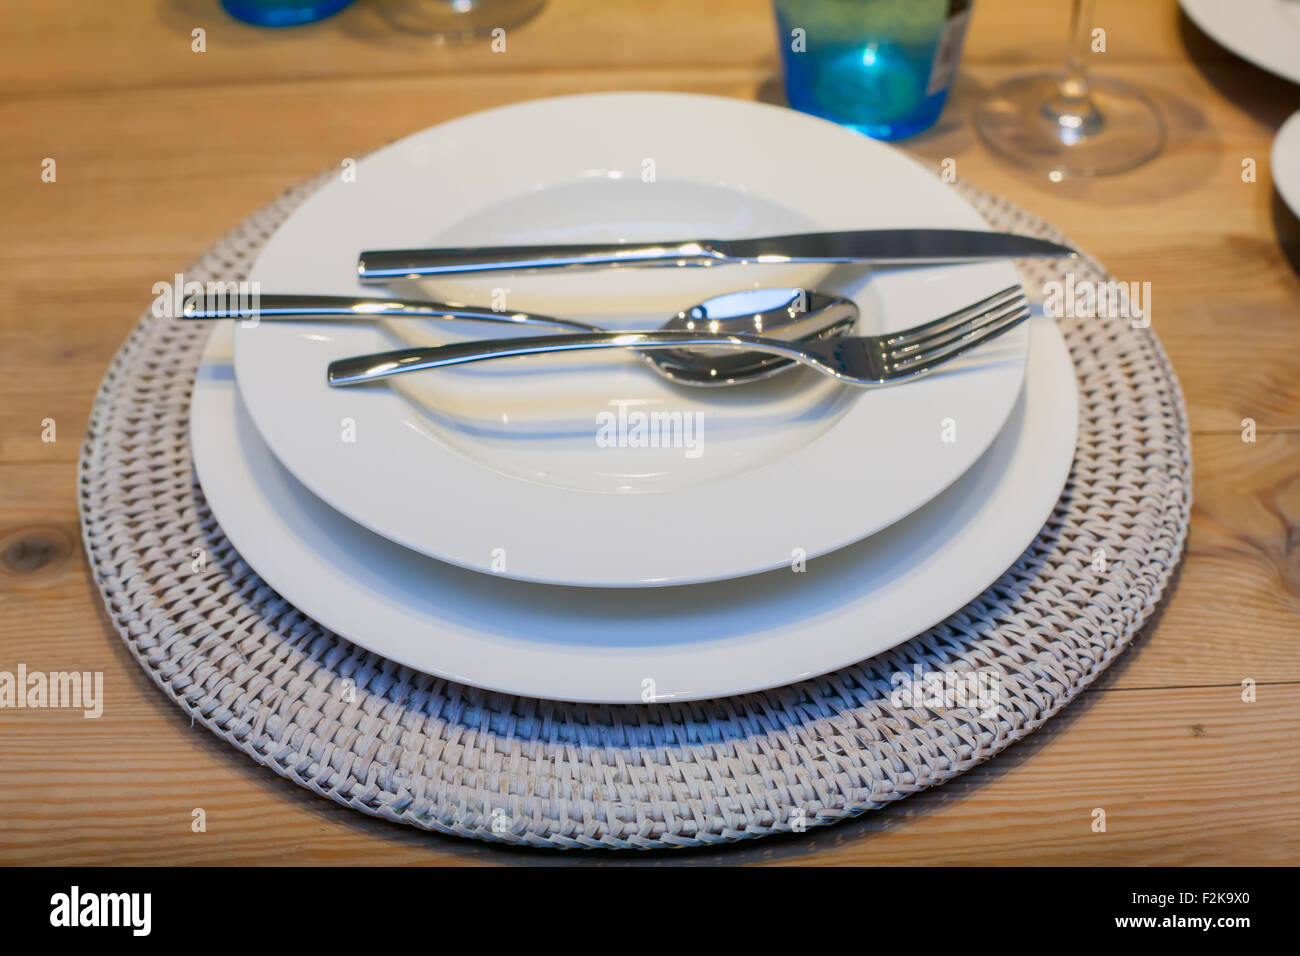 Close up of dishware on wooden table Stock Photo